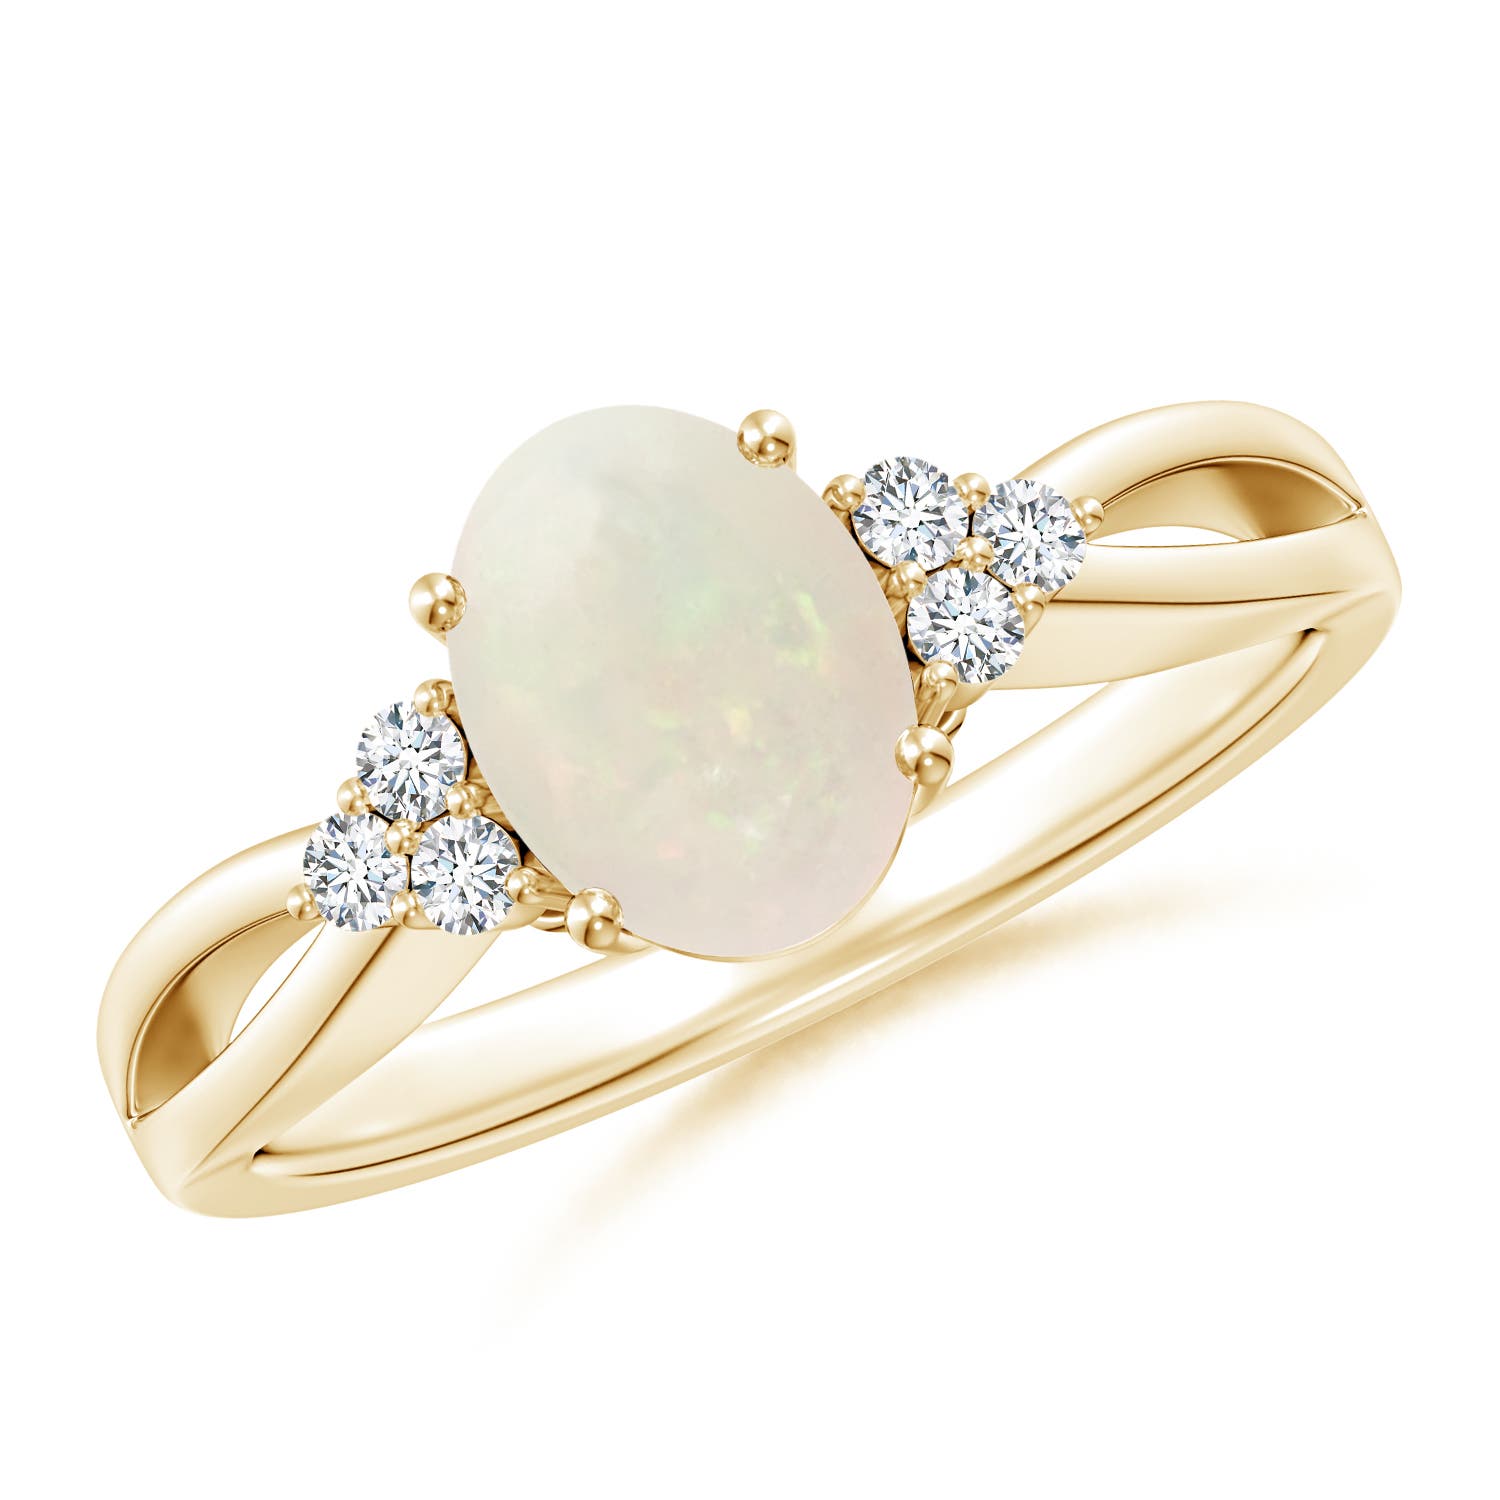 A - Opal / 0.88 CT / 14 KT Yellow Gold